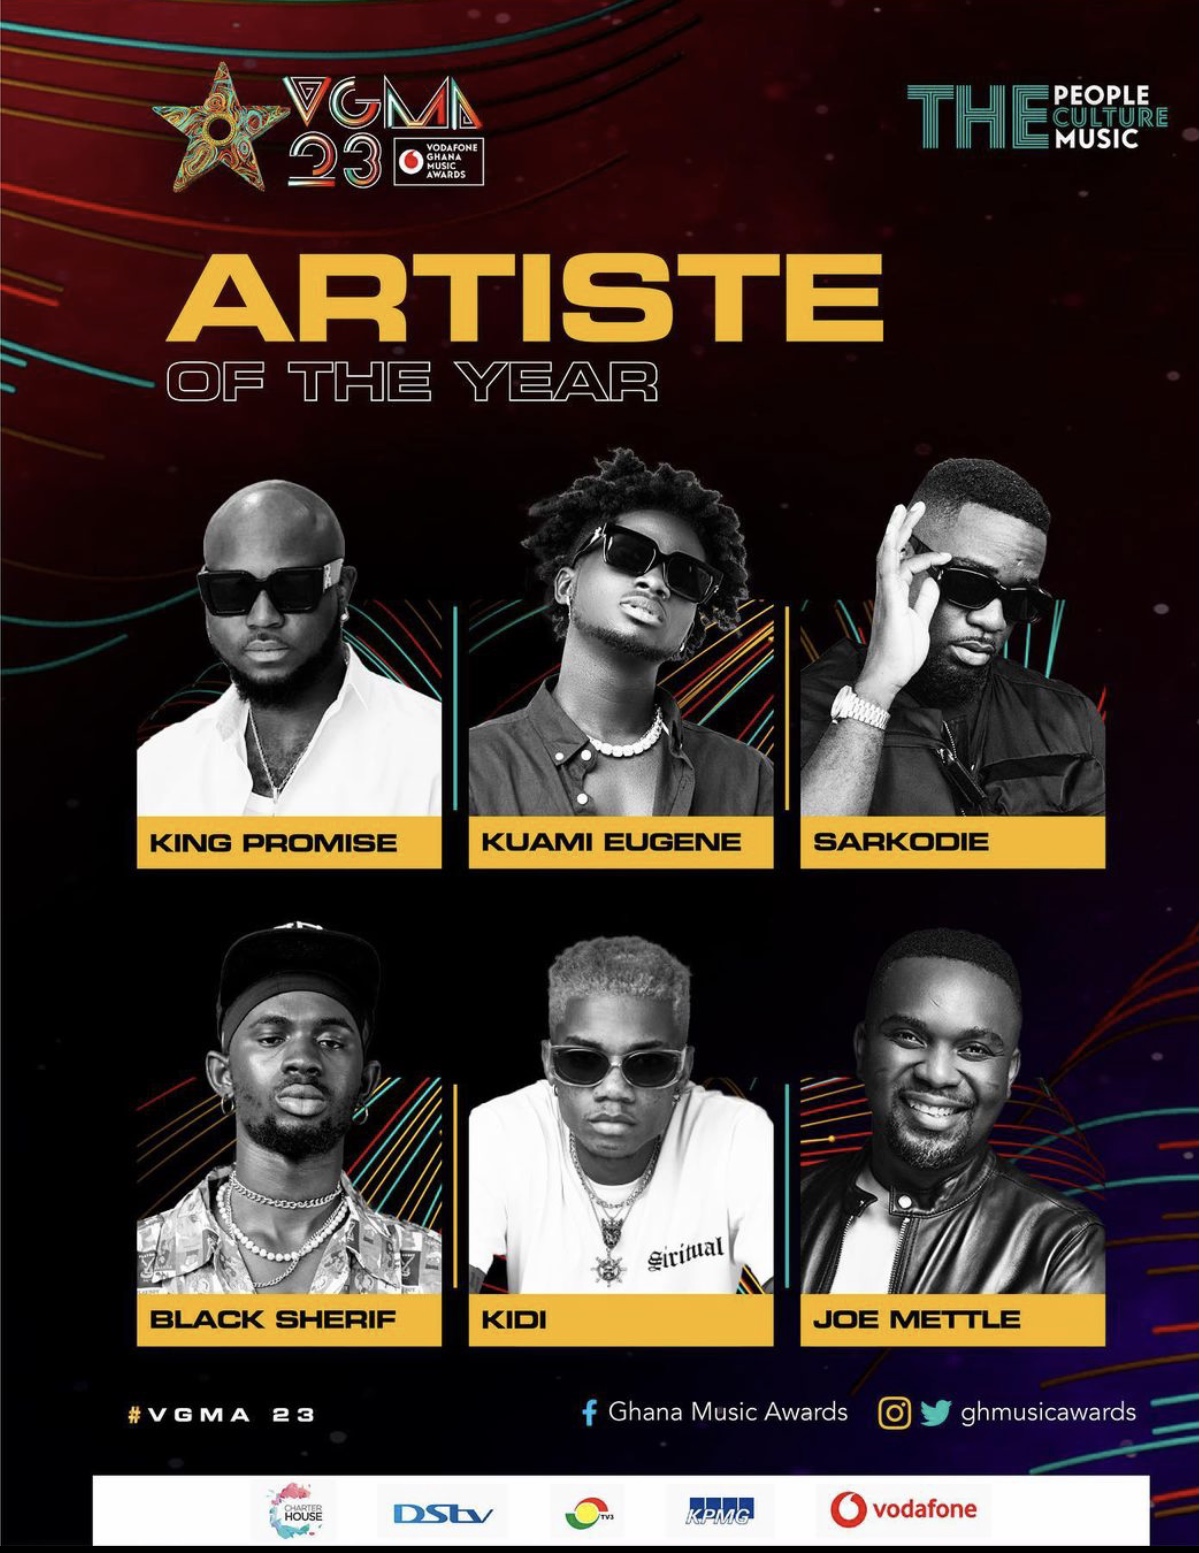 VGMA 23 : Artist of the year